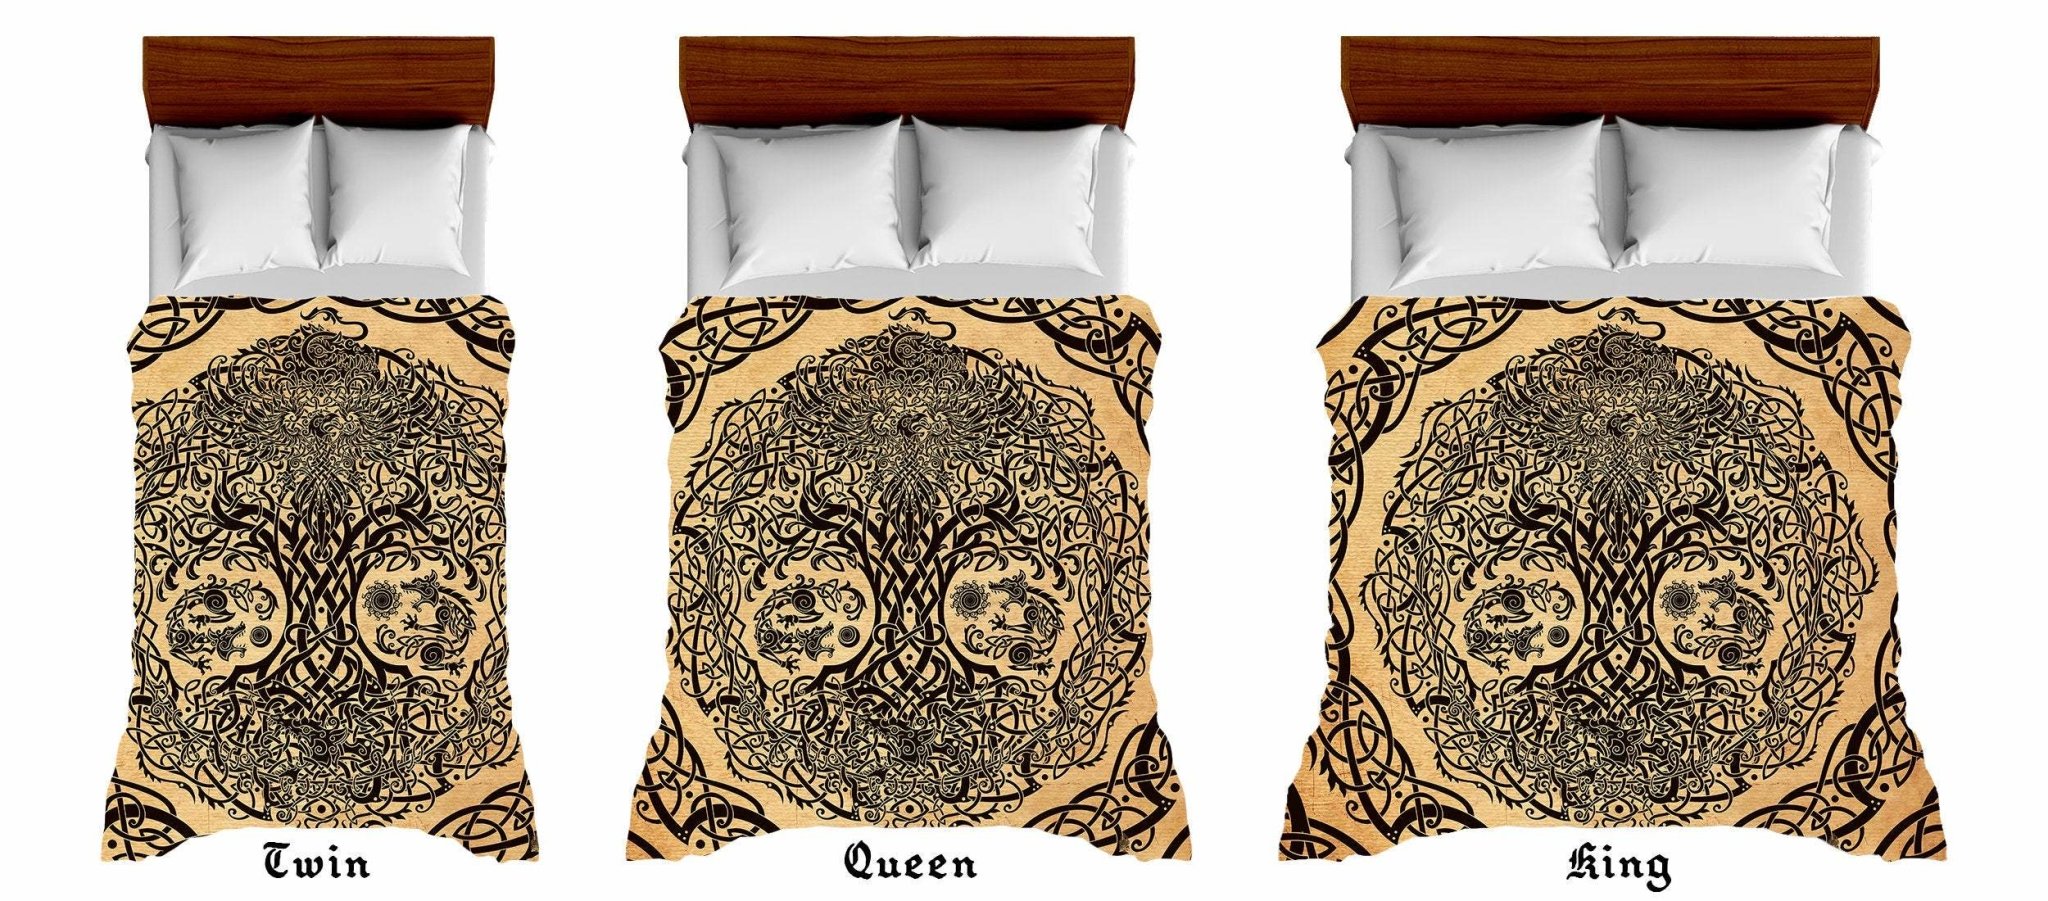 Viking Bedding Set, Comforter and Duvet, Yggdrasil Bed Cover and Bedroom Decor, Norse Art, King, Queen and Twin Size - Paper - Abysm Internal